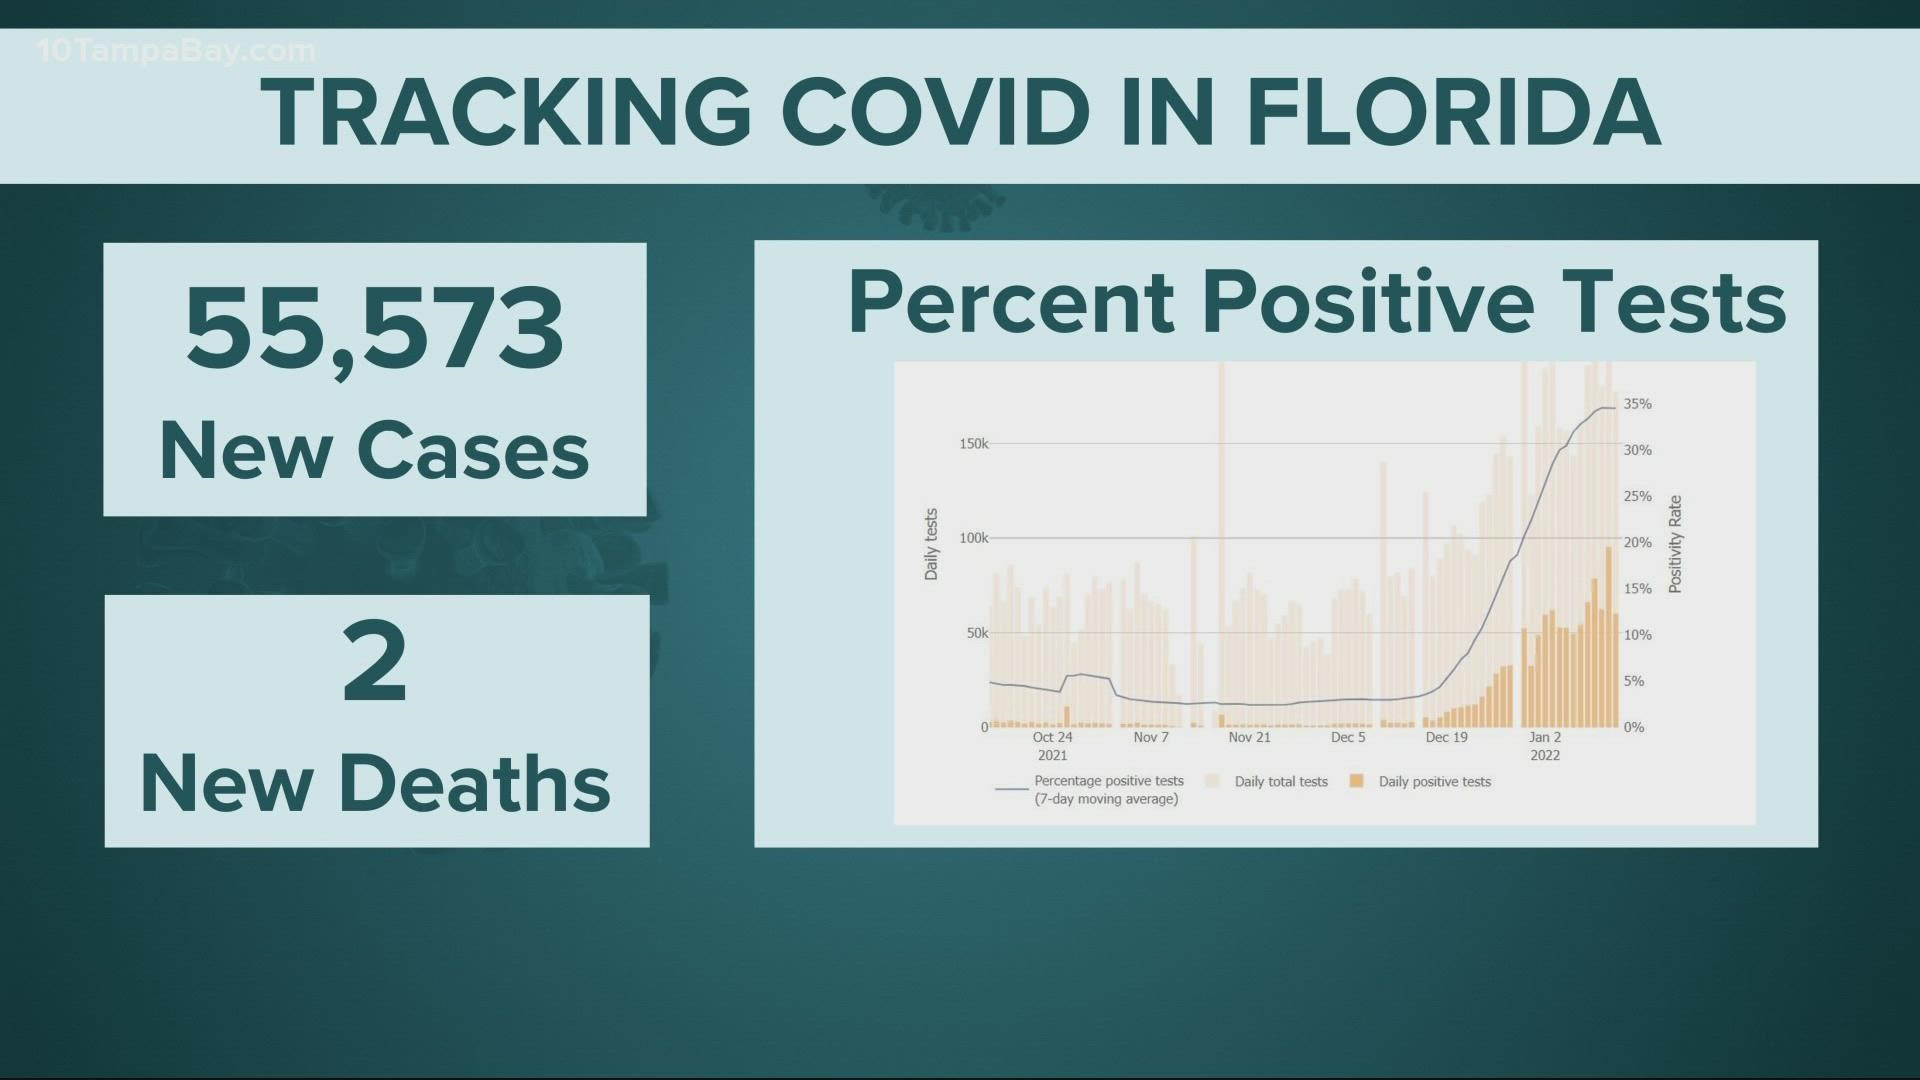 The Centers for Disease Control and Prevention reports 55,573 new cases in Florida for Jan. 12.